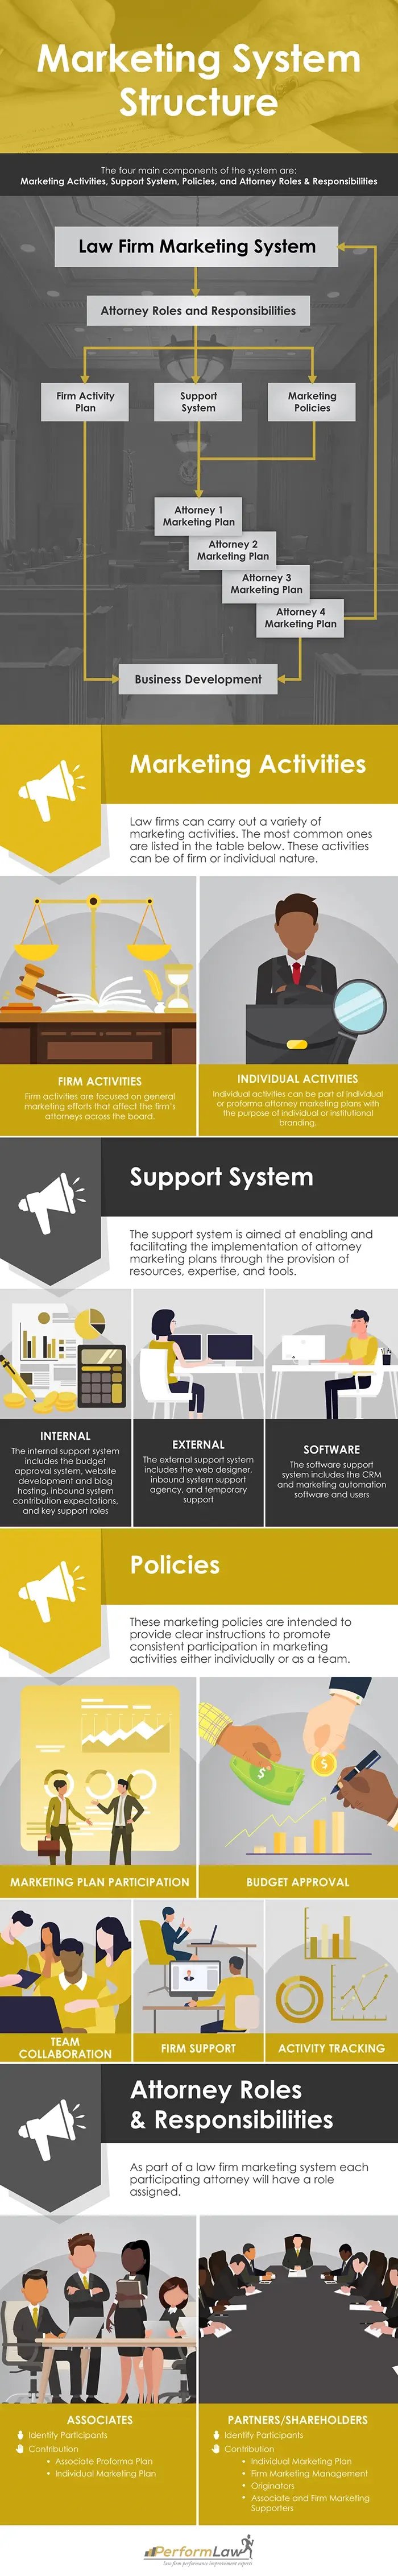 Marketing-System-Structure-Infographic-v3 (1)